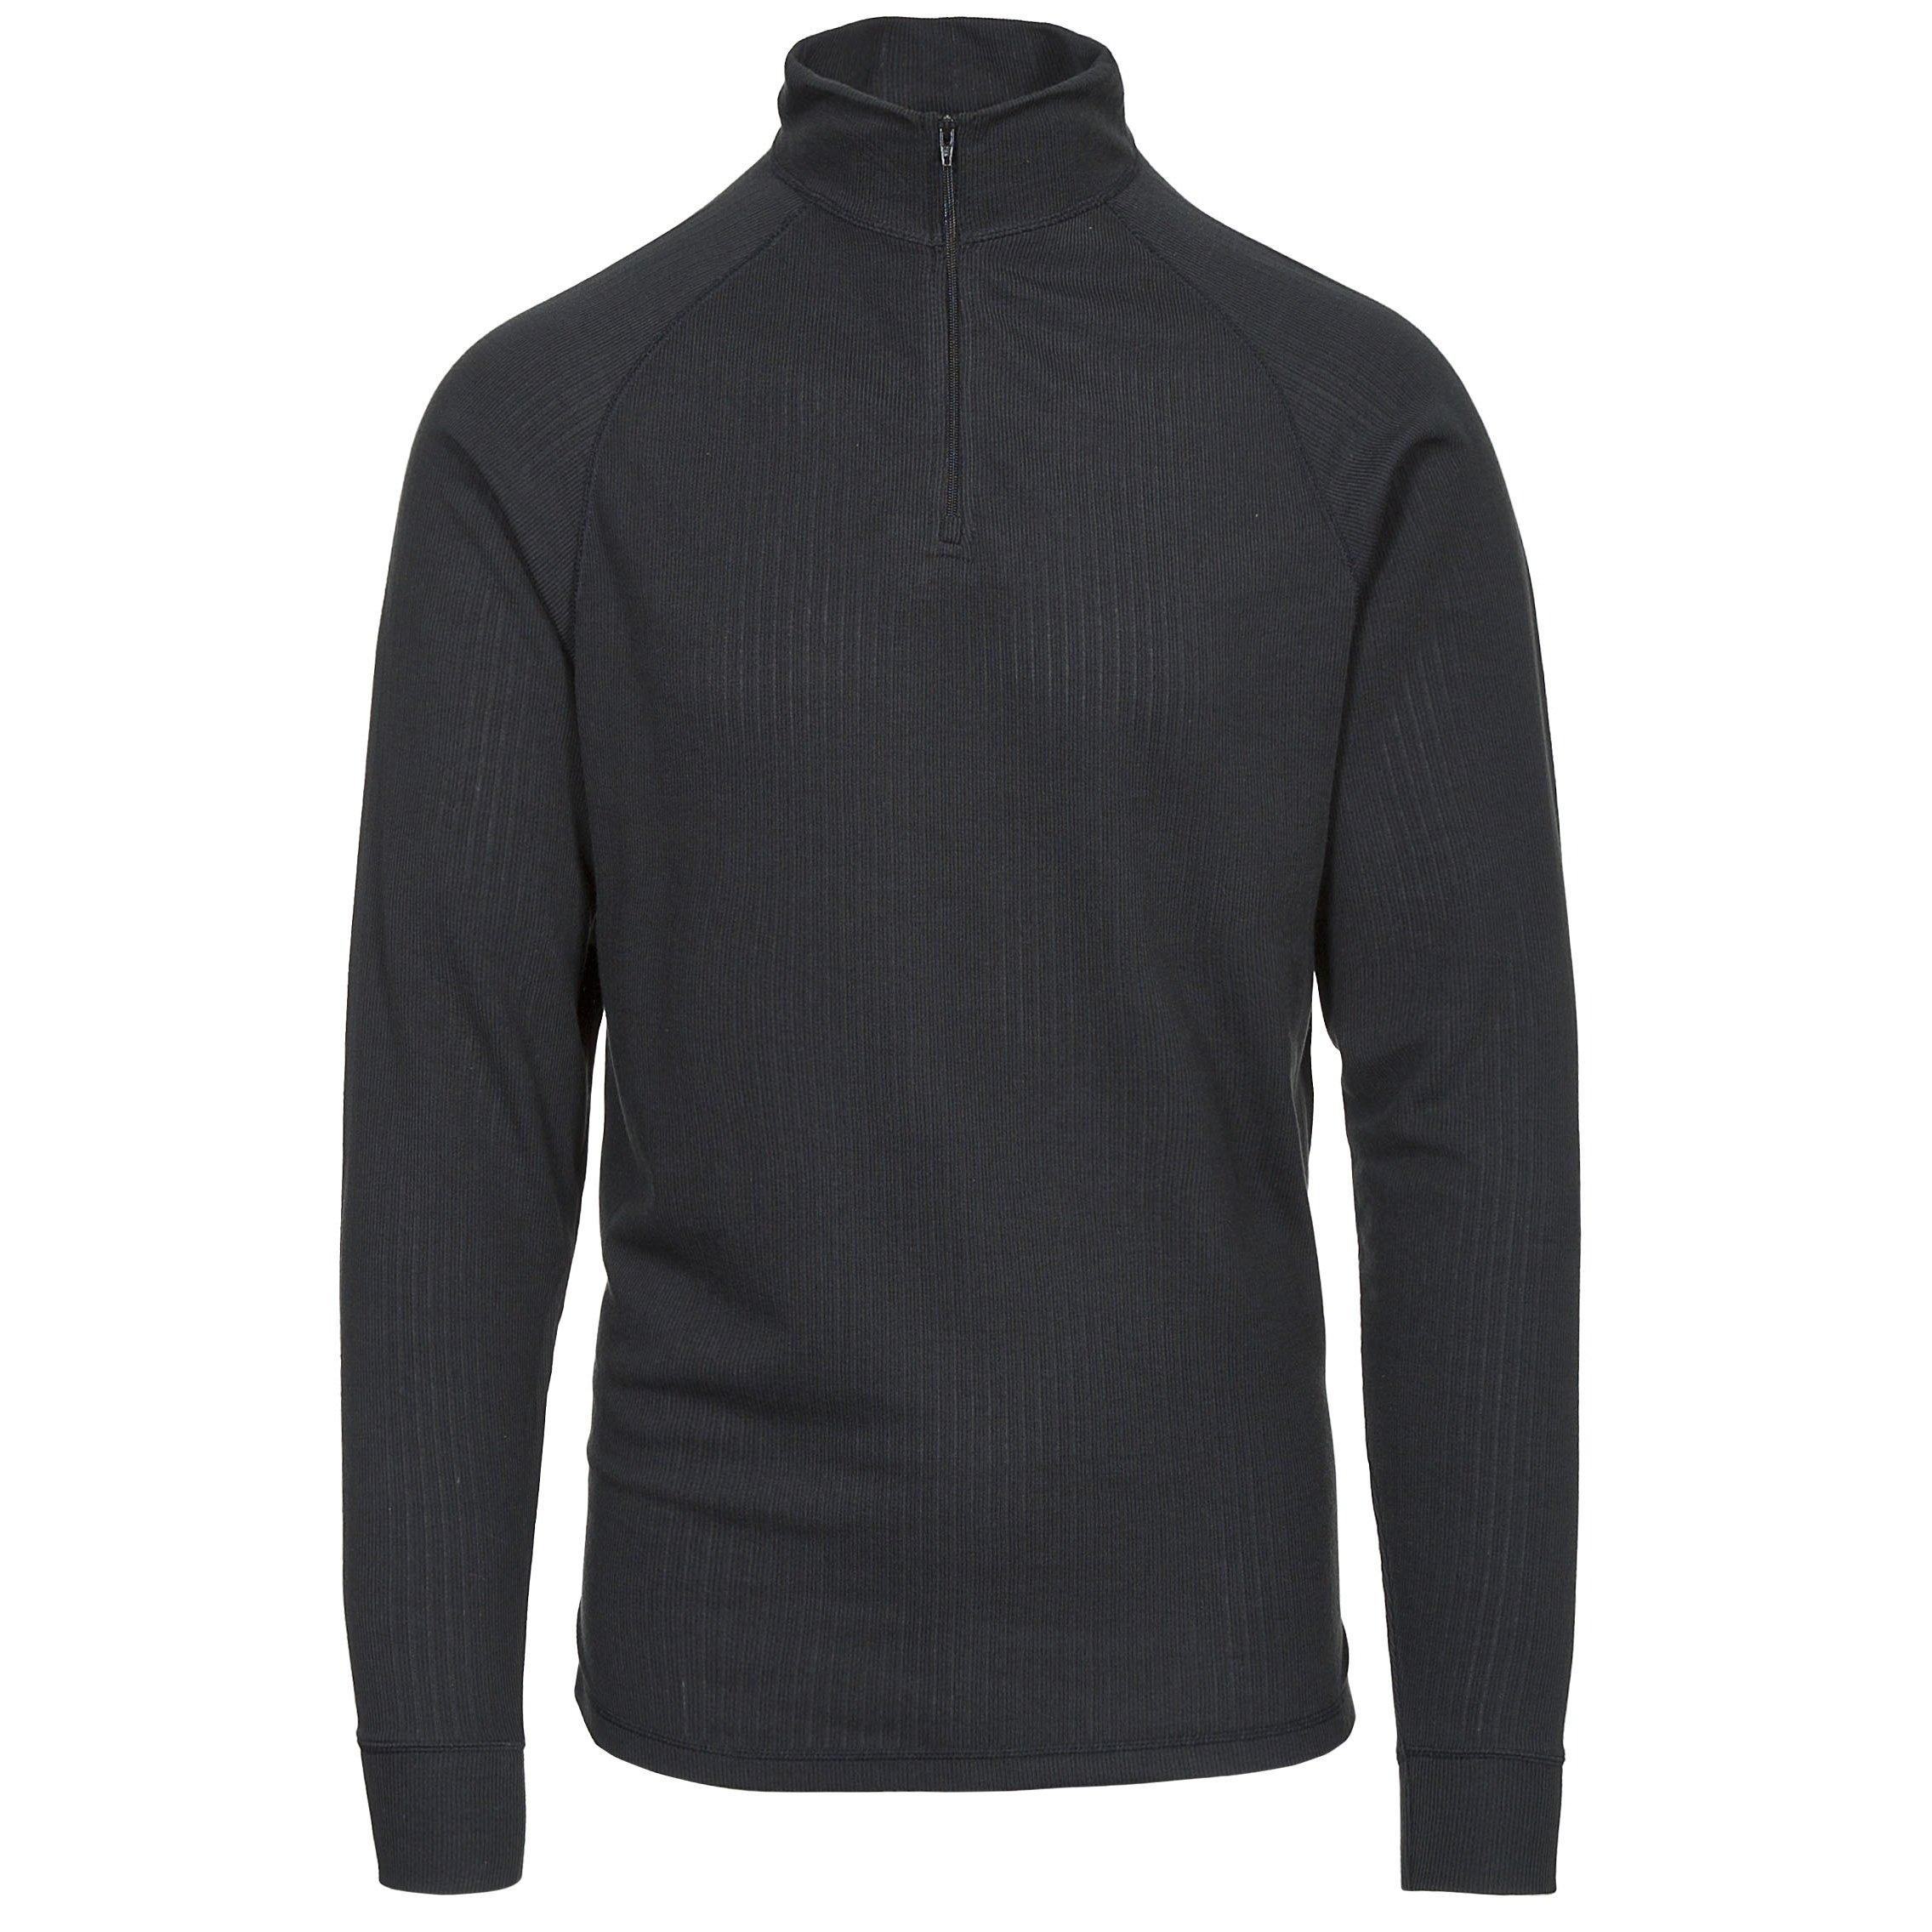 Trespass  Wise360 Quick Dry Baselayer Top 